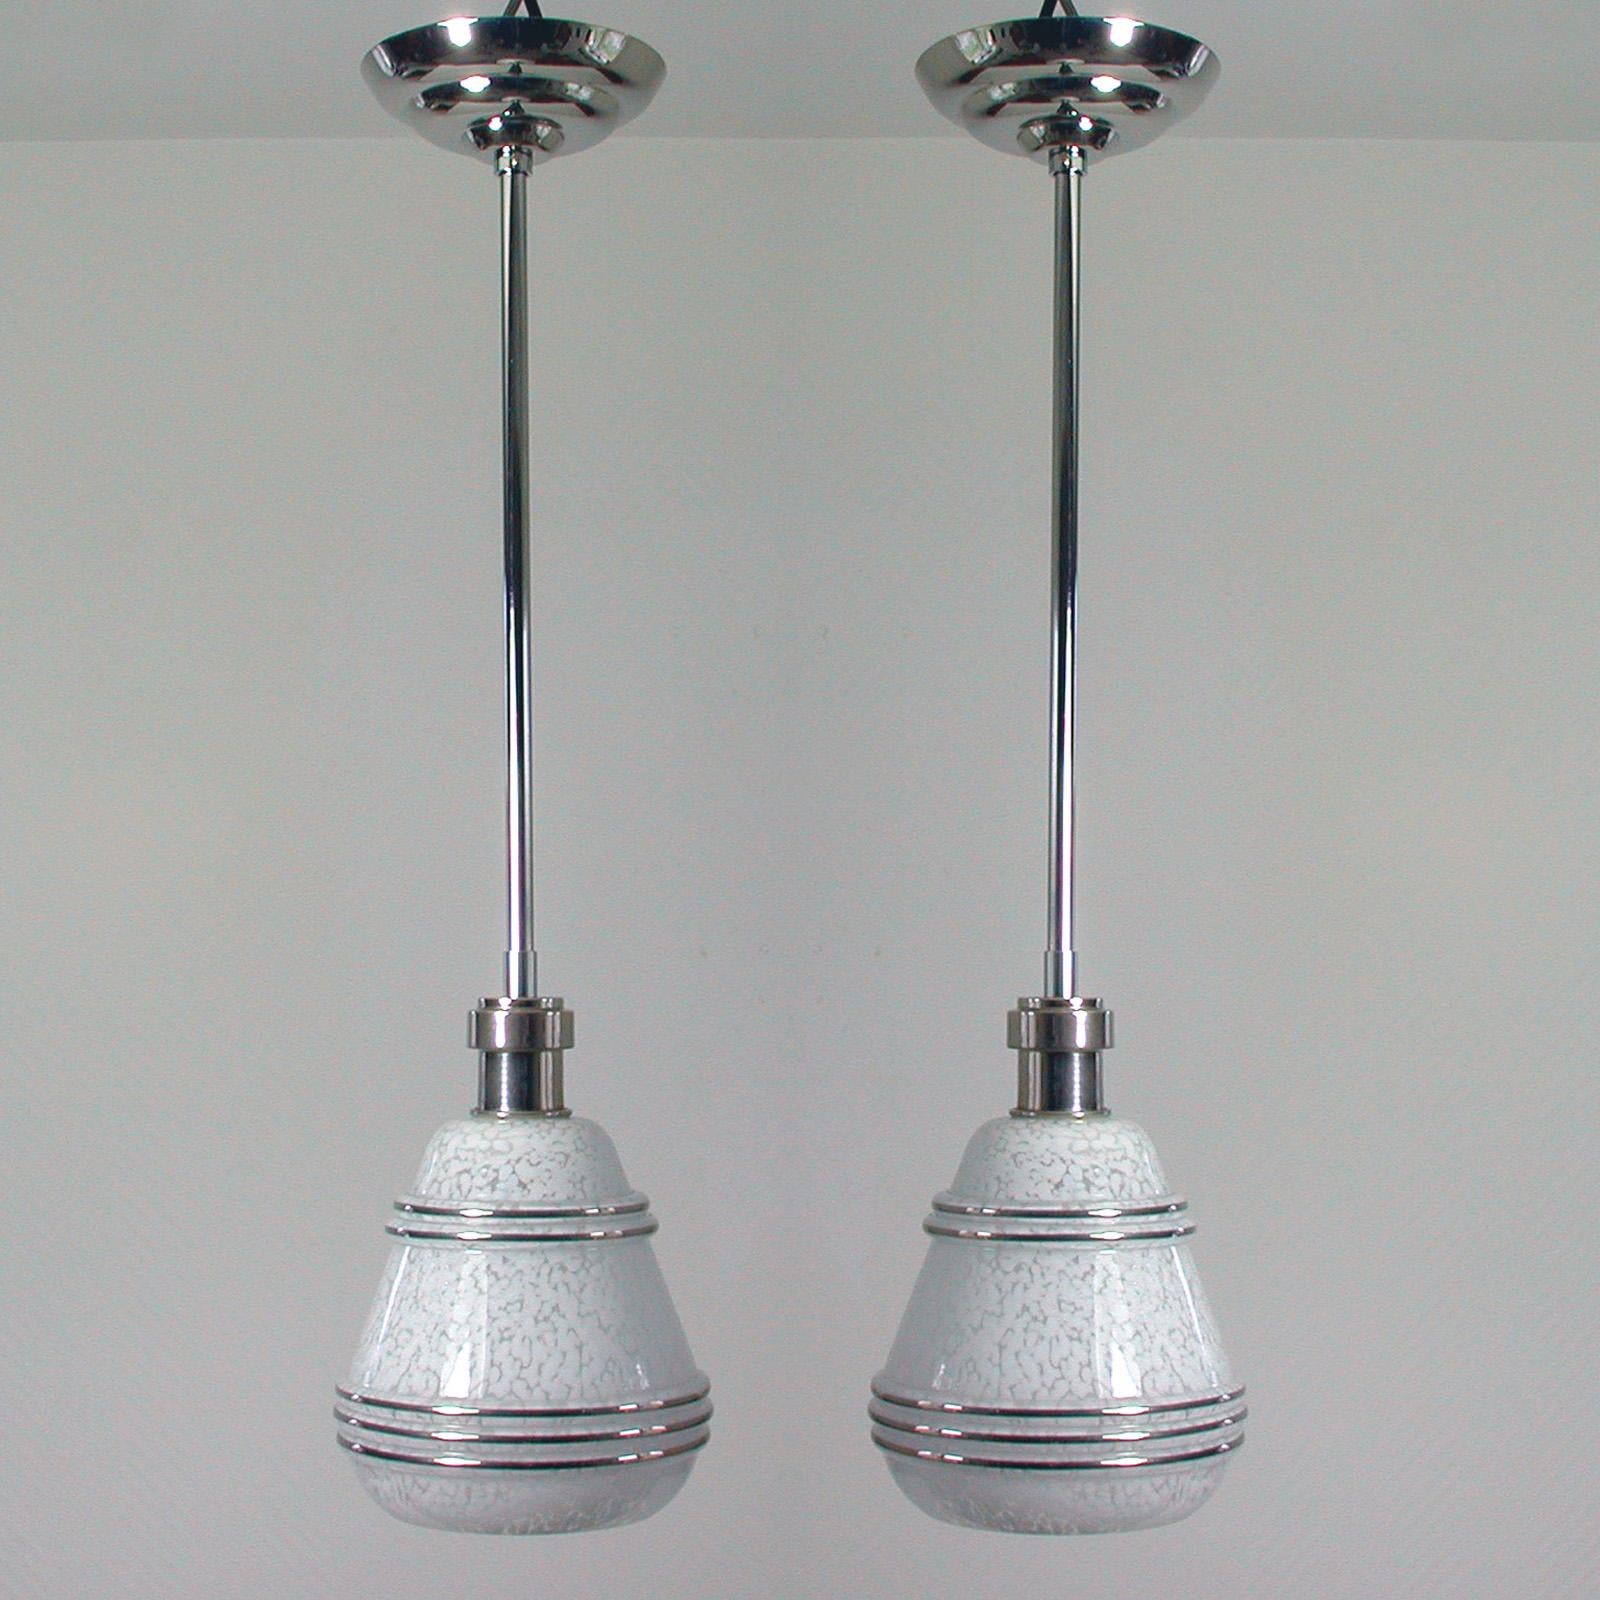 This elegant set of 2 pendants was designed and made in France in the 1930s-1940s. The lamps are made of nickel plated metal / chrome and have got a mottled white glass shade with silver decor. 

The lamps can be used as pendants as well as flush